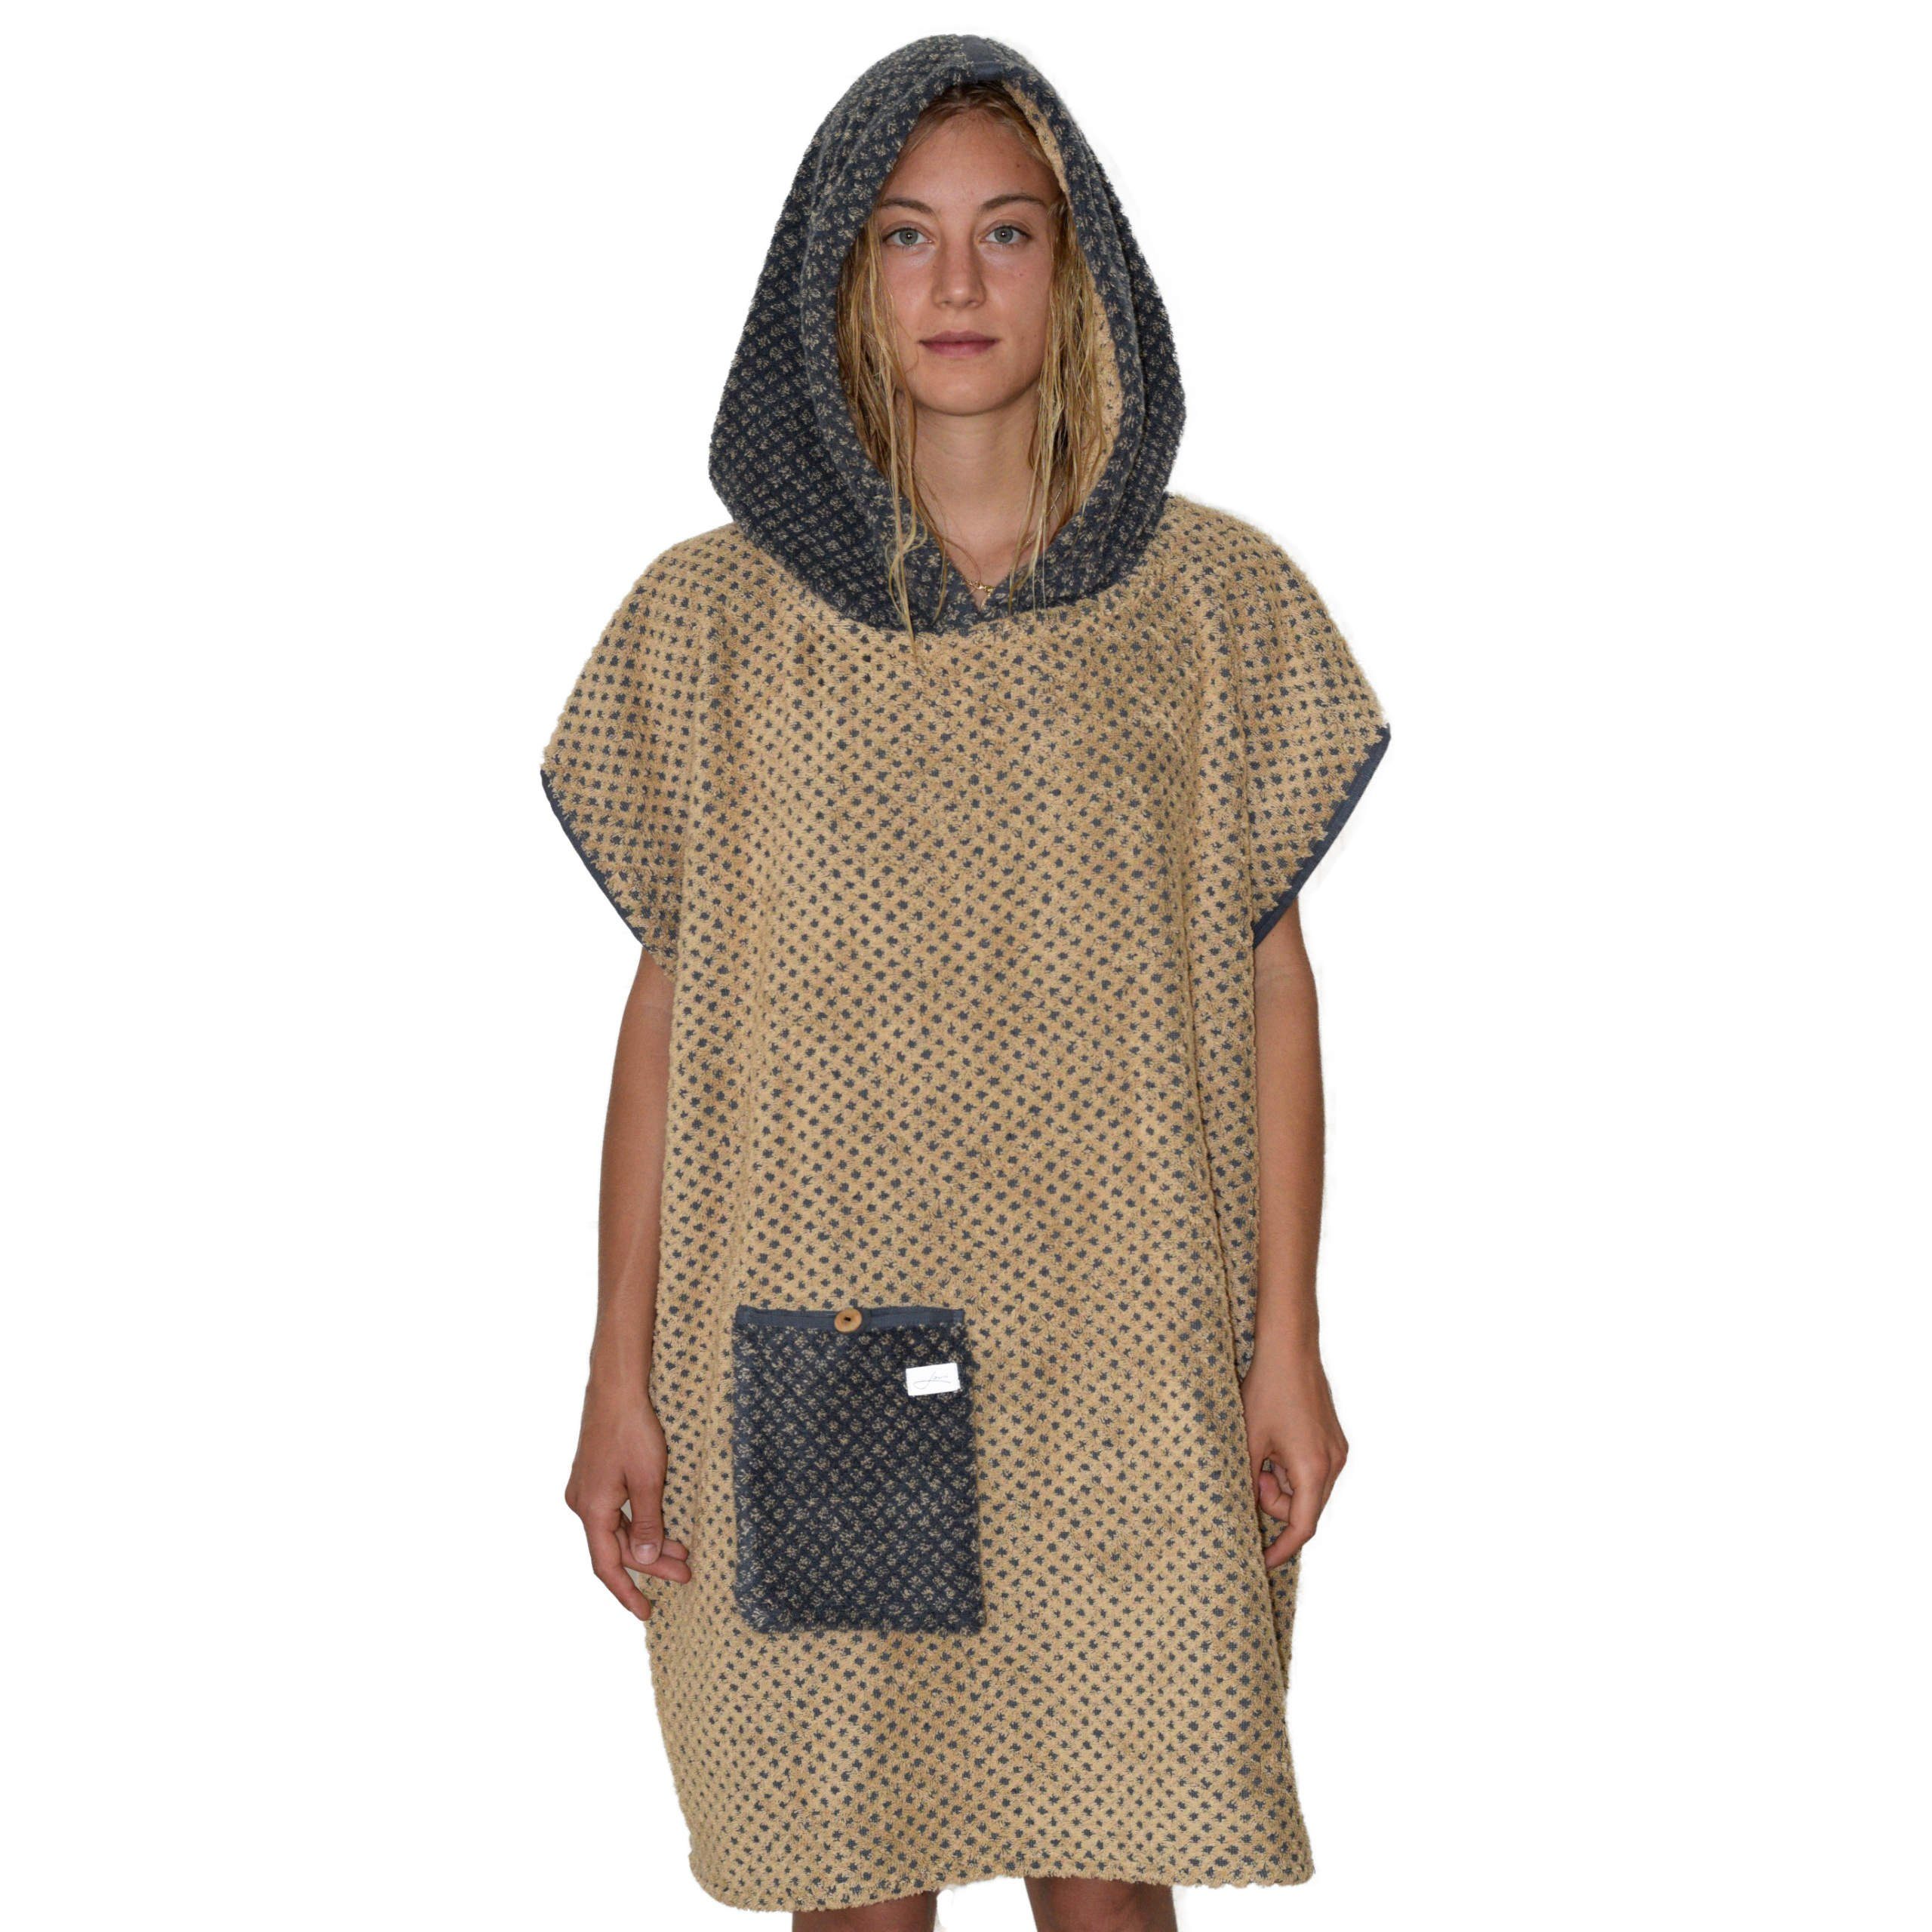 Lou-i Surfponcho Kapuze, mit Made Badeponcho Germany Erwachsene Badeumhang, Tasche Gold Kapuze in Frottee und